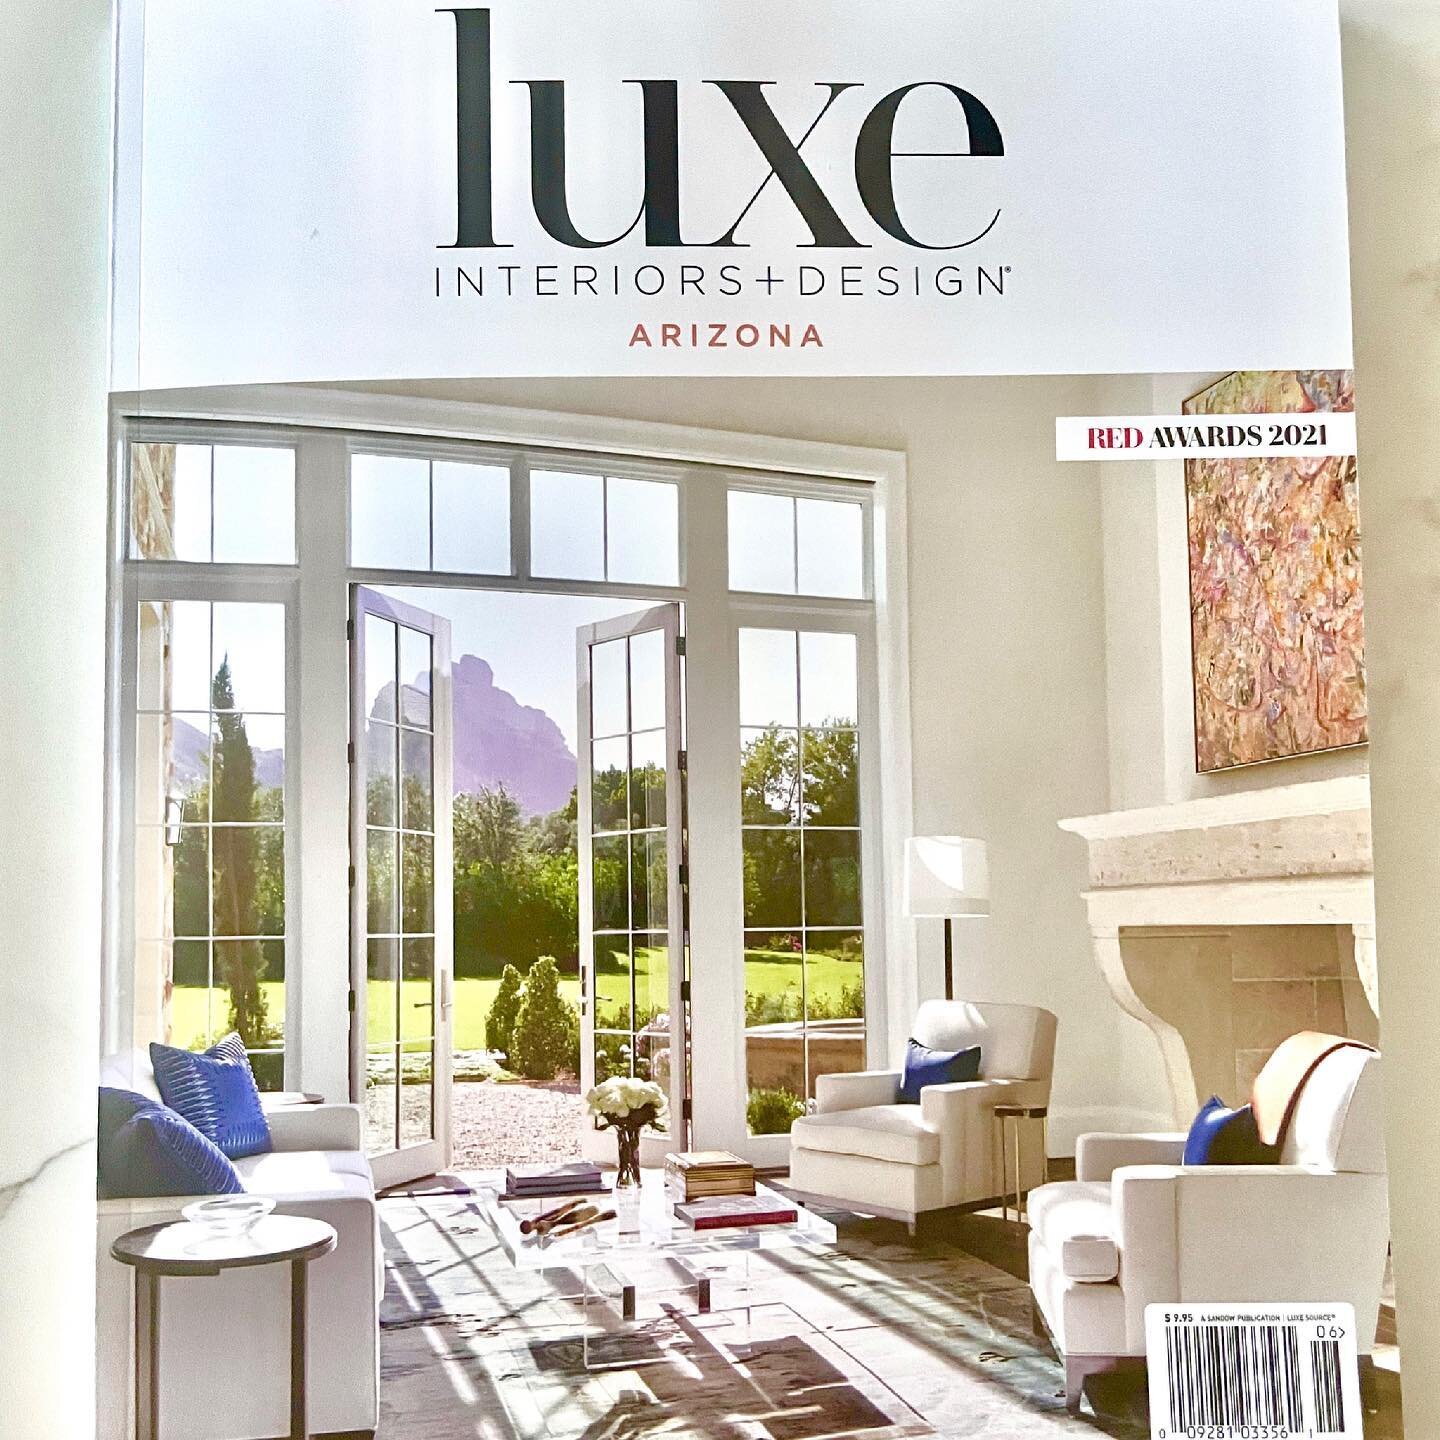 The magazine has arrived! So thrilled to see our project in print and honored to be a RED Award recipient! #luxeredawards #luxemagazinearizona #luxemagazine